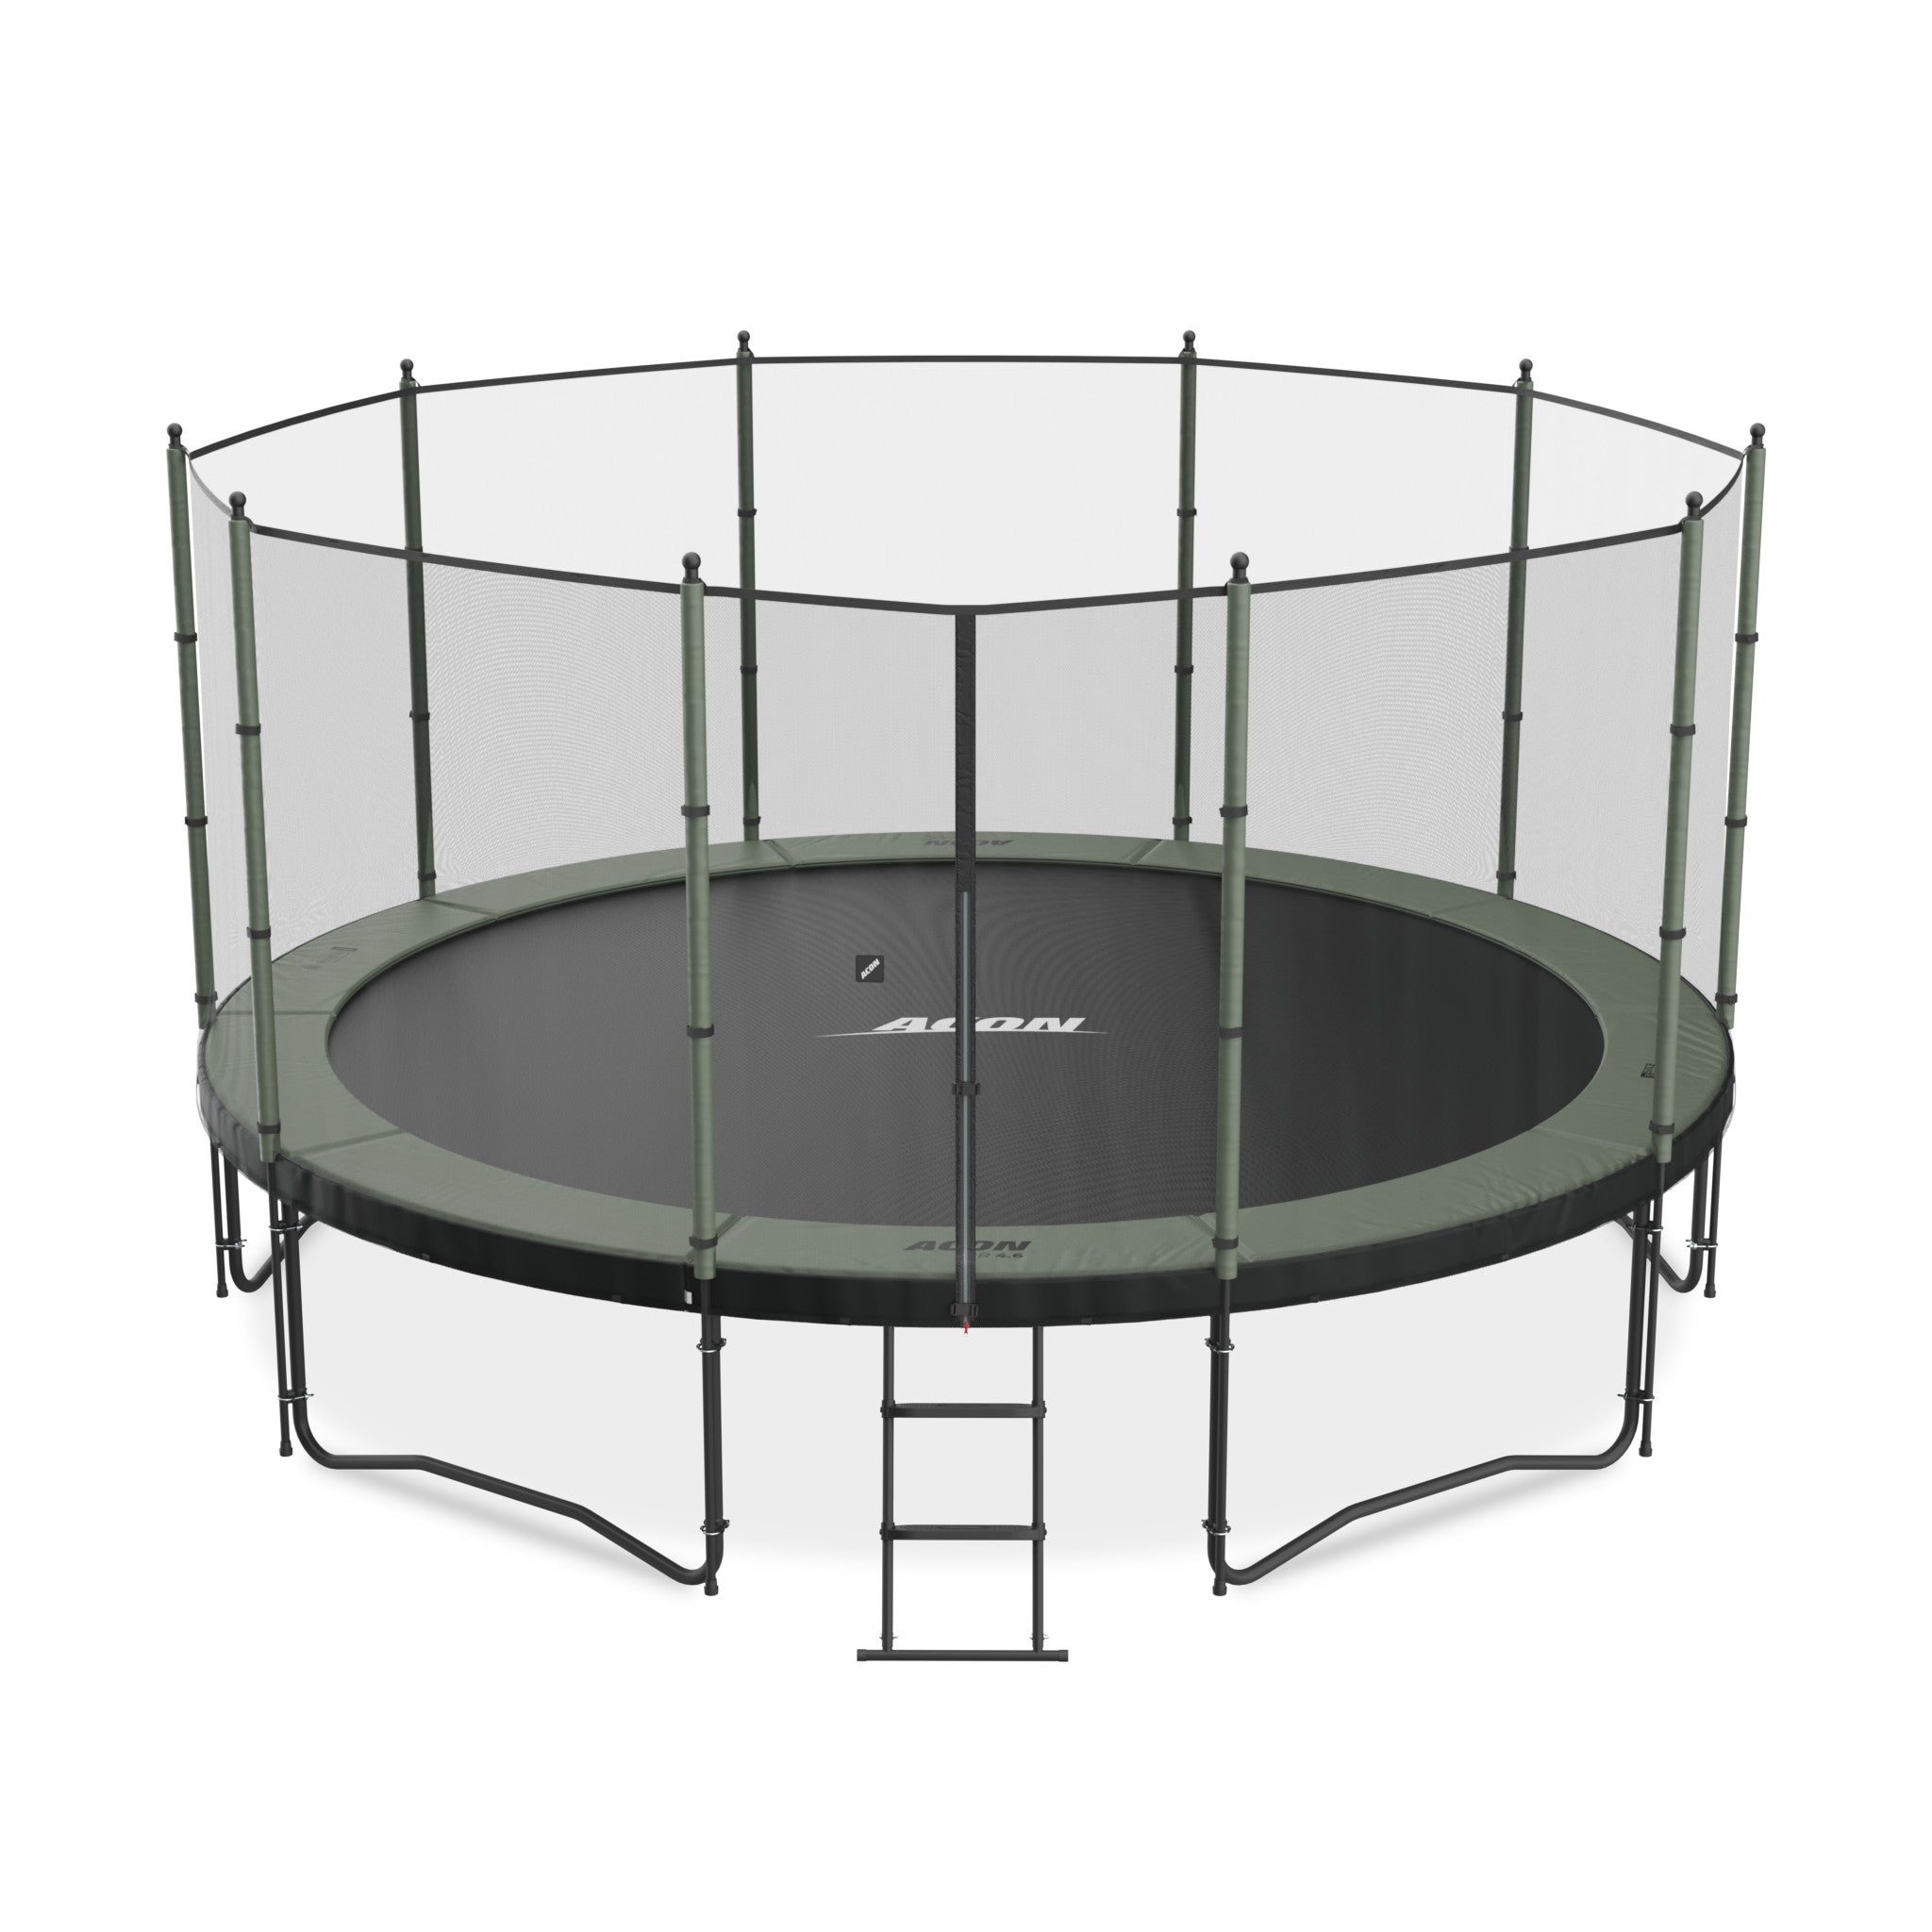 ACON Air 15ft Trampoline with Standard Enclosure.